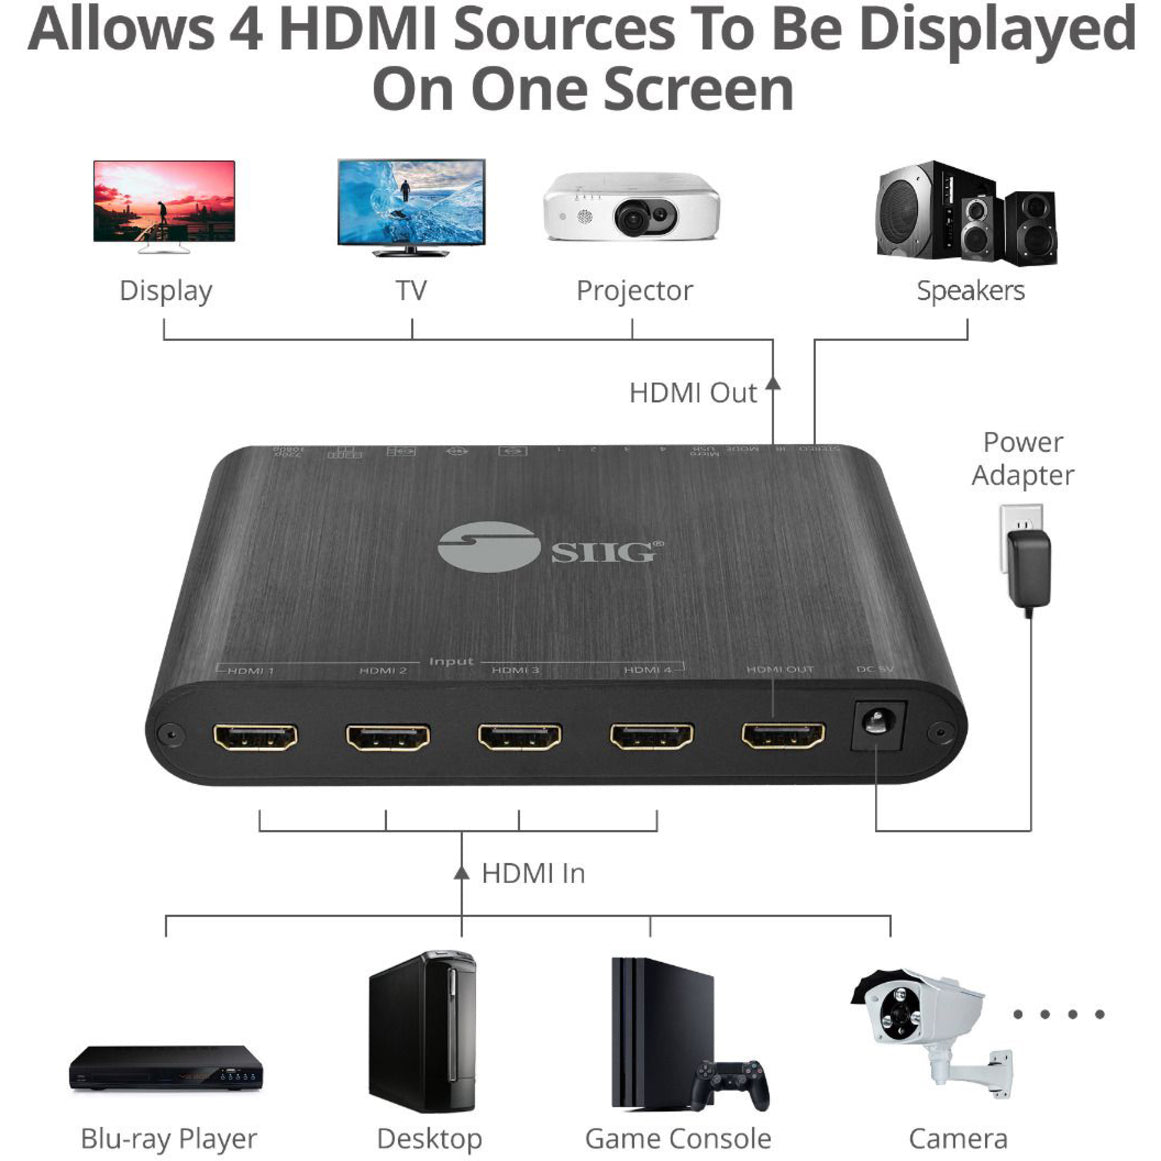 SIIG CE-H25R11-S1 4x1 HDMI Seamless Quad-Split Multi-Viewer Switcher, Full HD, 3 Year Warranty, TAA Compliant, RoHS Certified